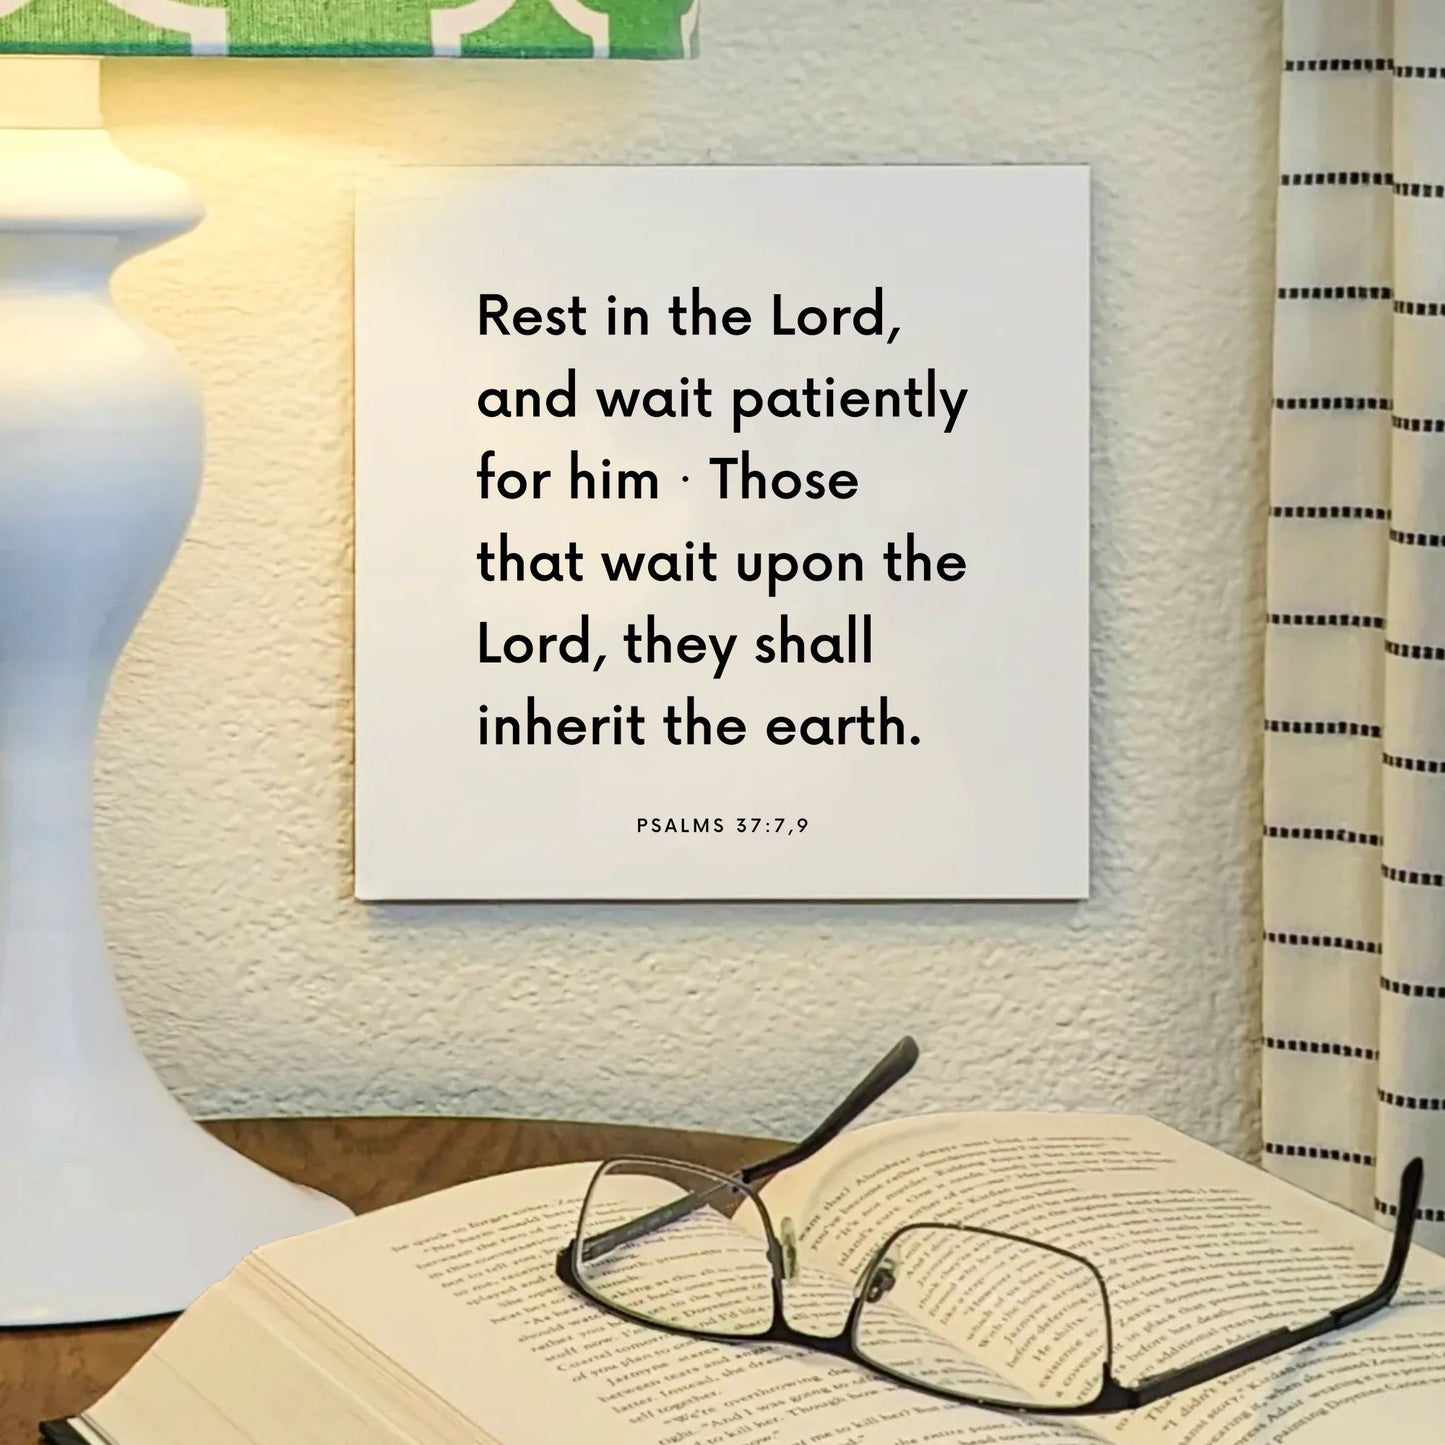 Lamp mouting of the scripture tile for Psalms 37:7,9 - "Rest in the Lord, and wait patiently for him"